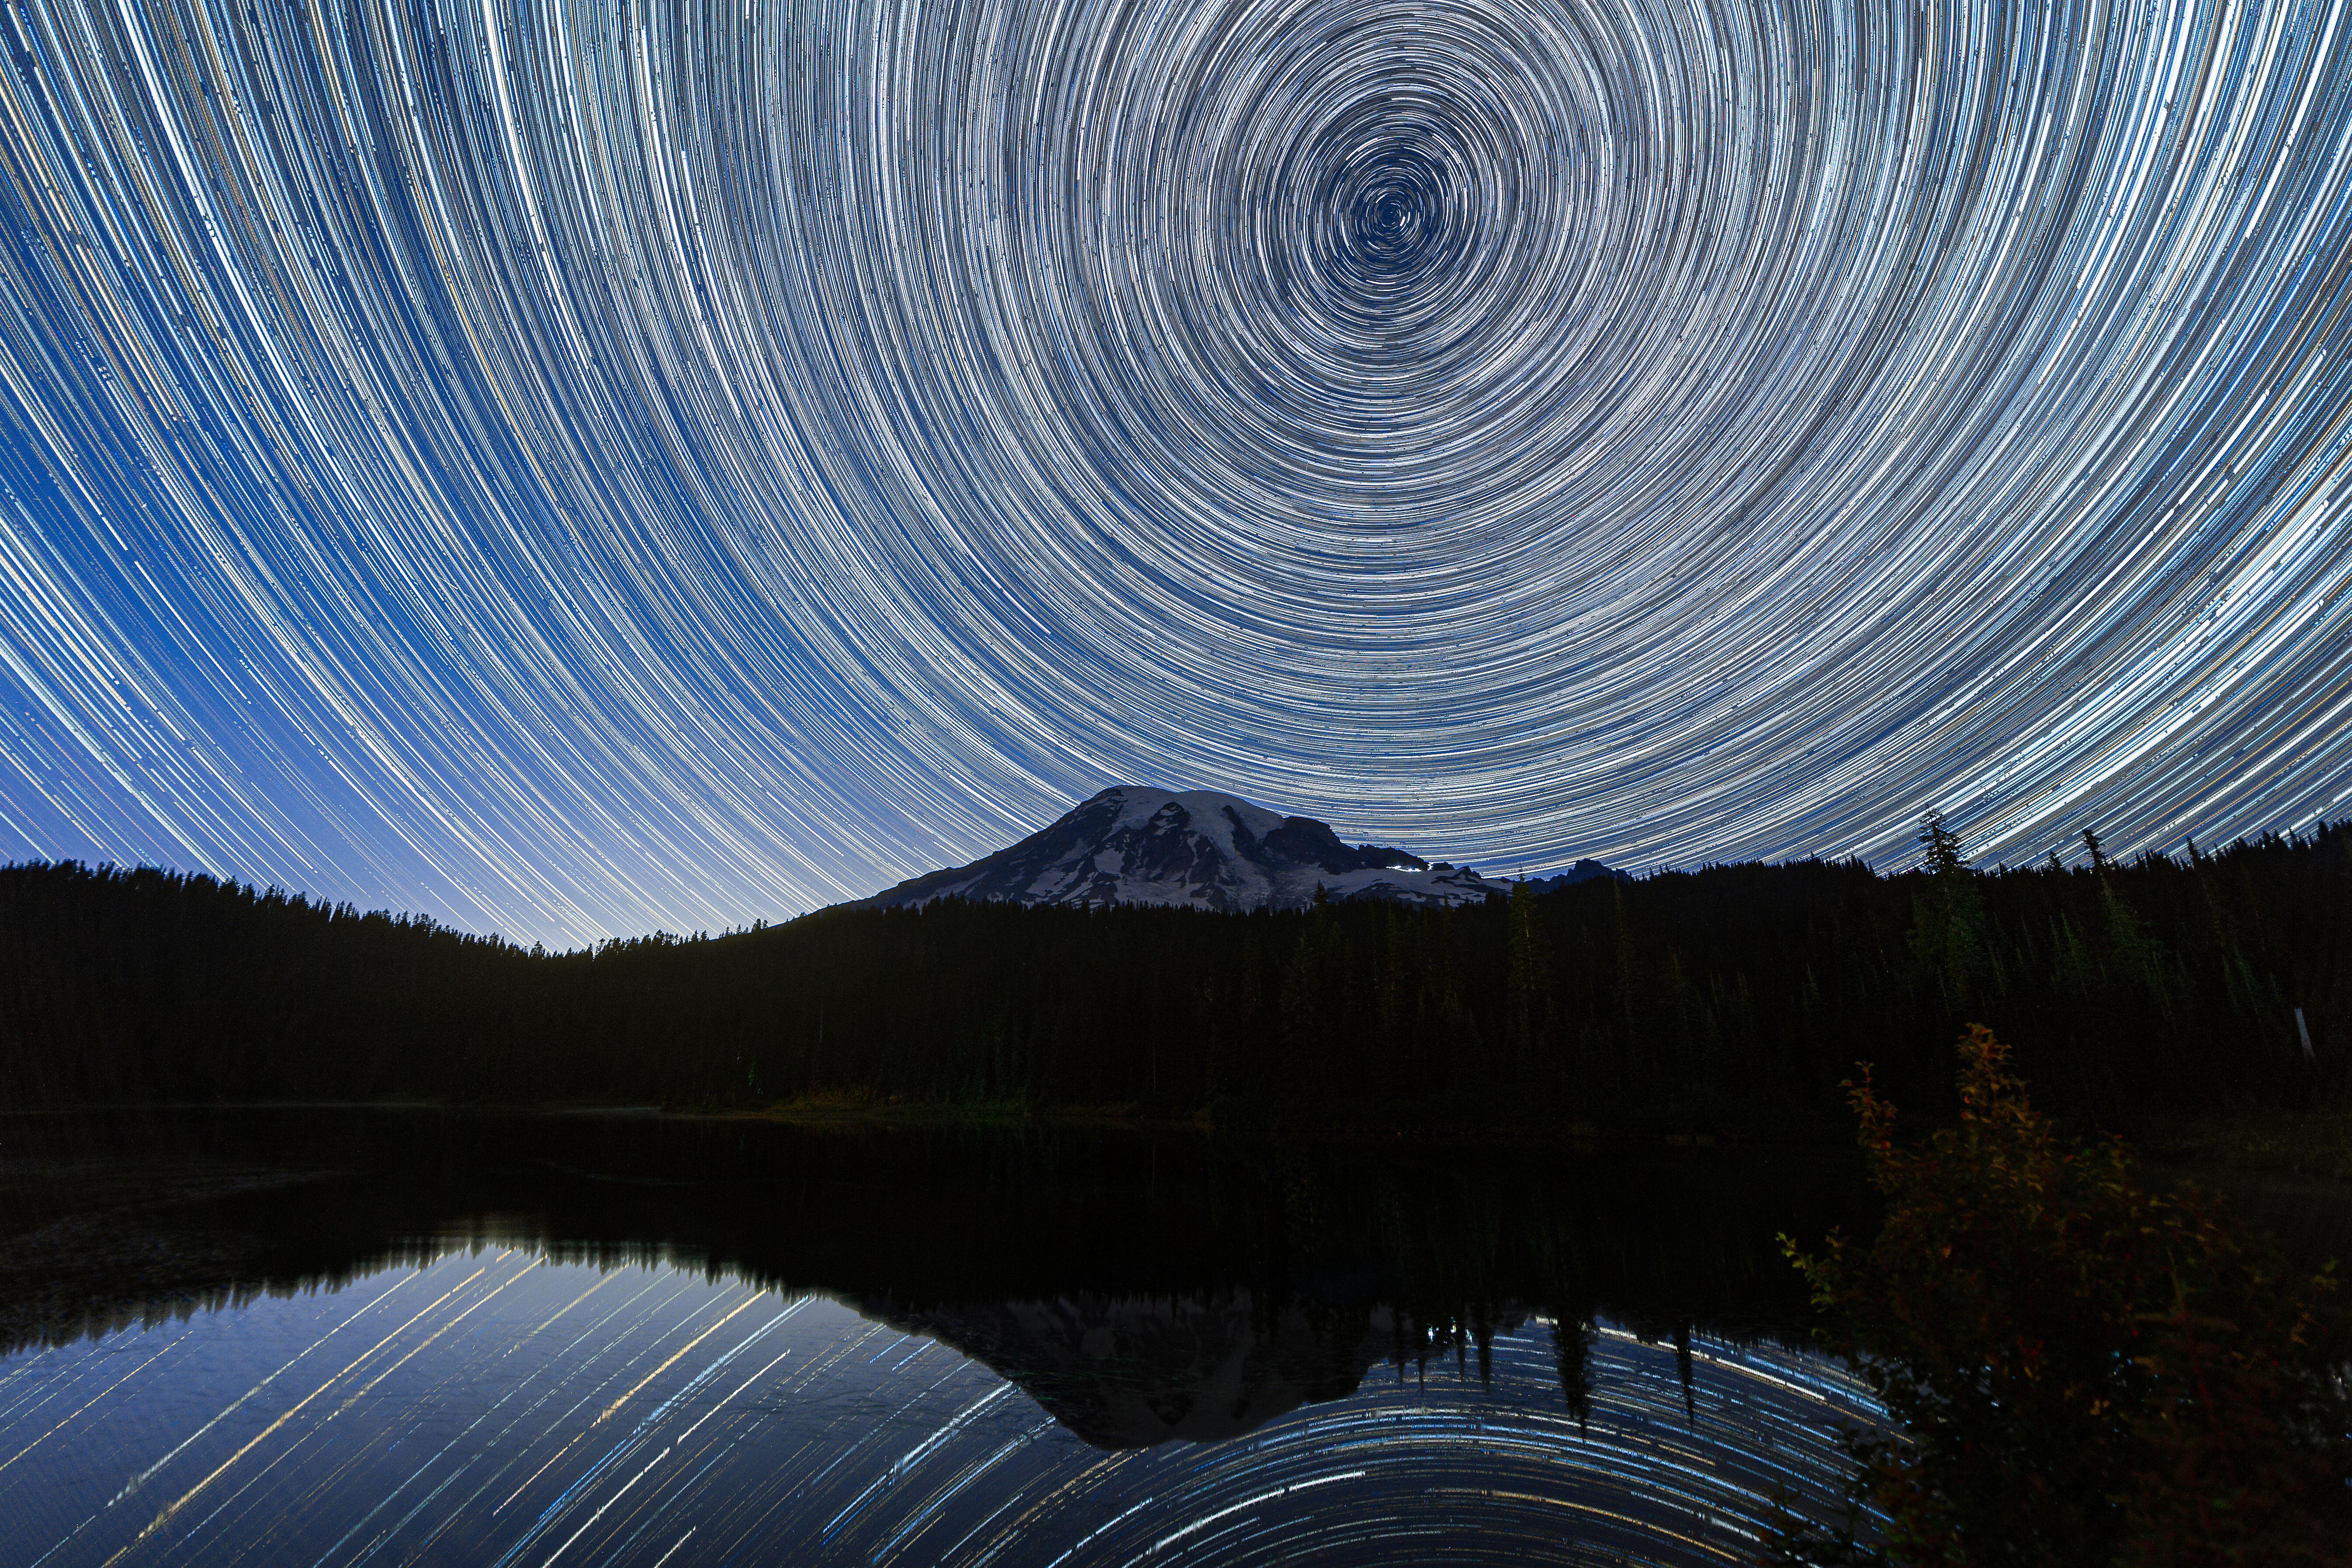 Long exposure photograph showing star trails in the sky over Mount Rainier reflected and mirrored in Reflection Lake in Washington state